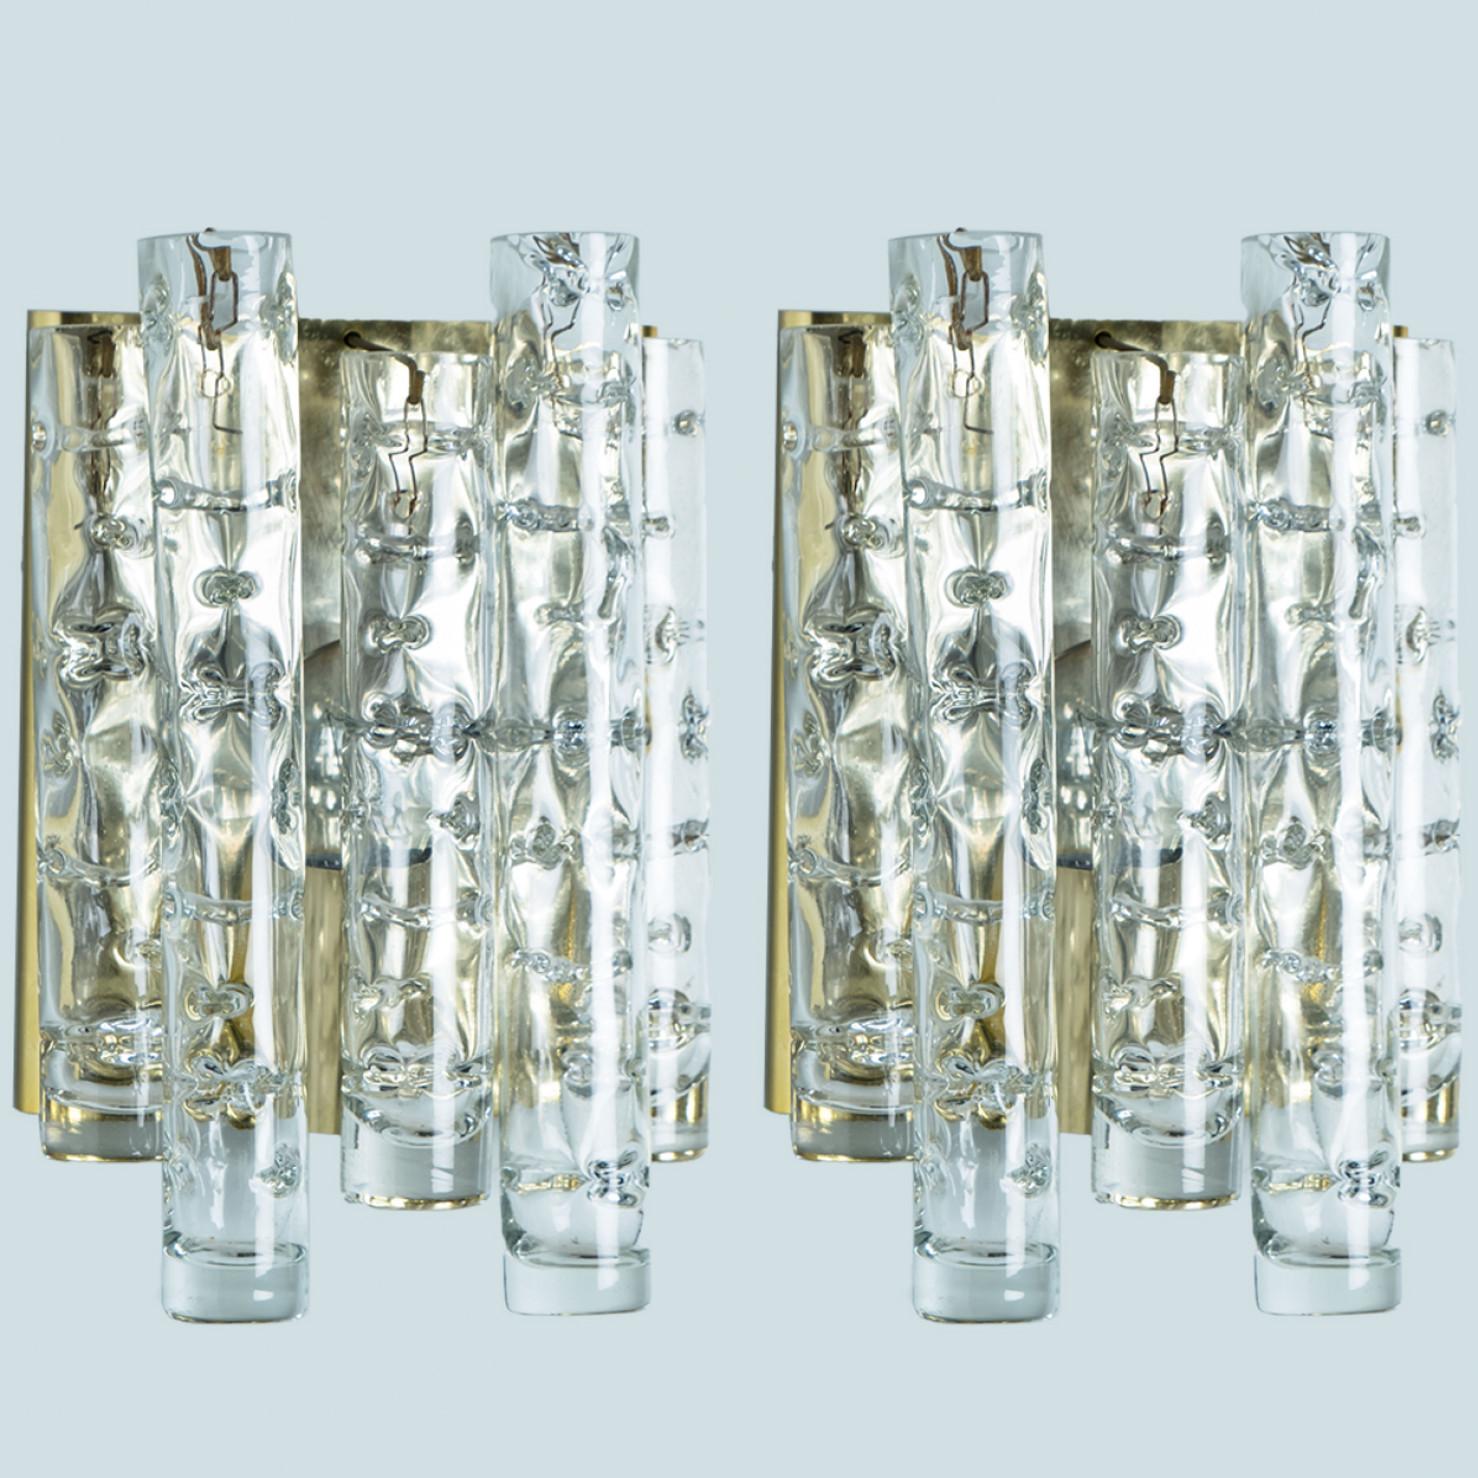 Pair of Structured Tubes Wall Lights by Doria Leuchten, 1960s For Sale 5